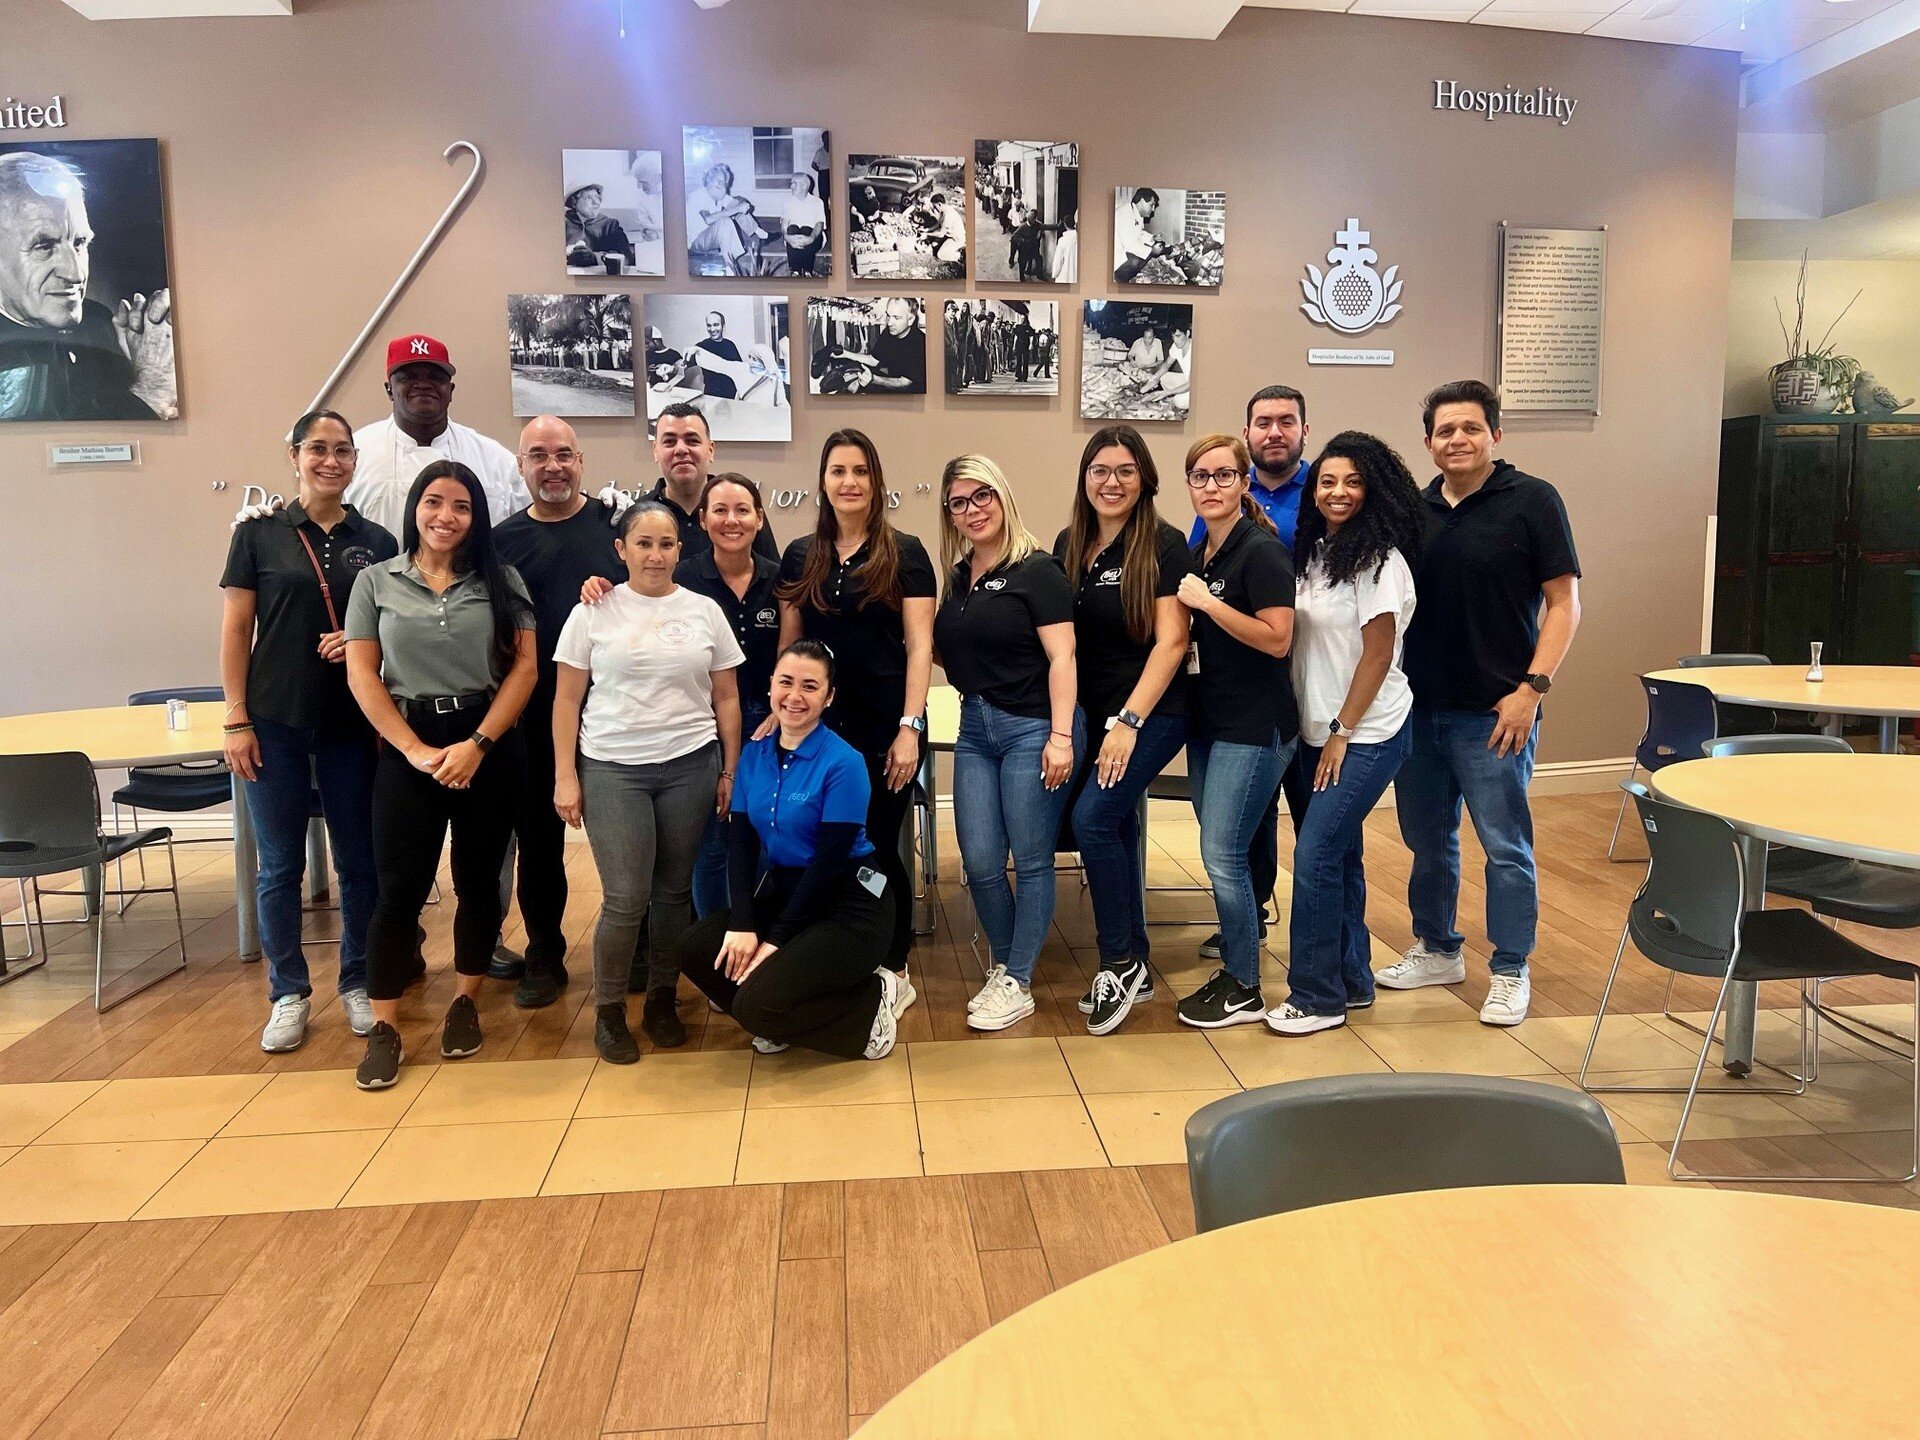 Our team recently collaborated with @camillus_house to provide lunch for the homeless in our community. We're immensely grateful for the opportunity to serve and make a positive impact. A huge thank you to Camillus House for their incredible work and